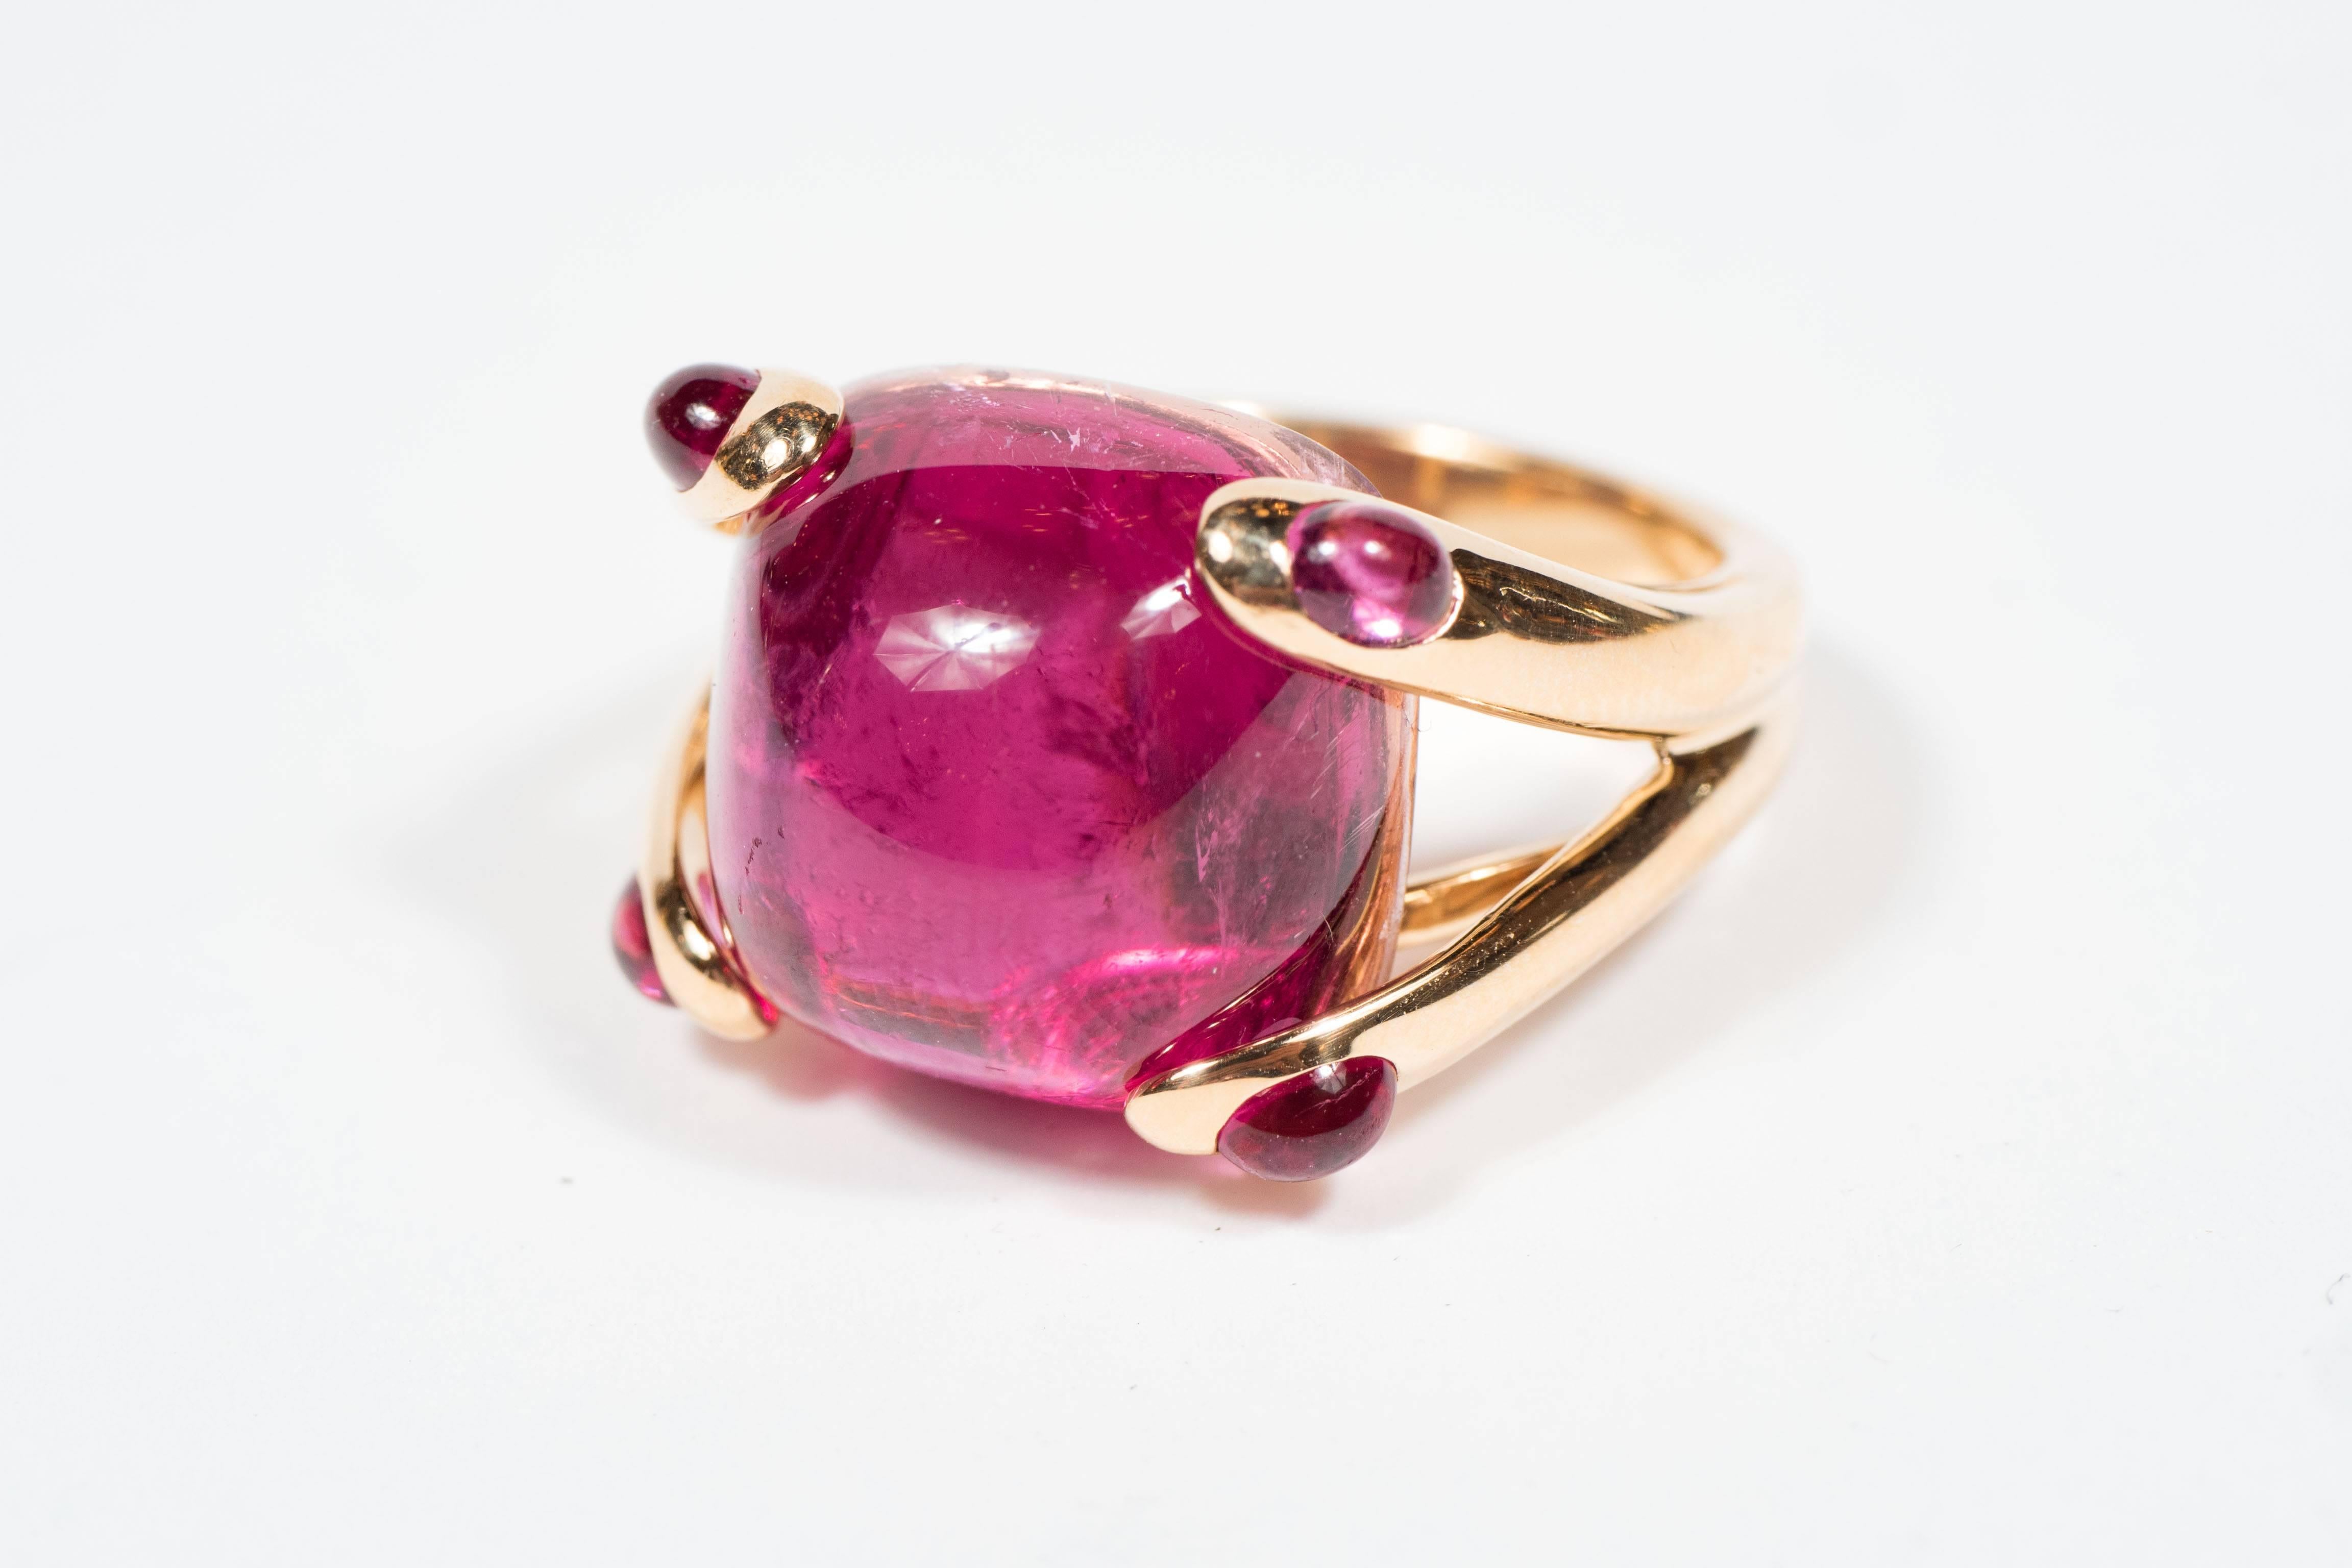 This exquisite rubelite and 18-karat yellow gold "Candy" ring was hand crafted in Italy by the celebrated maker Verdura circa 1968. Centered is one cushion-shaped rubellite weighing approximately 23 carats, cornered by 4 round rubellite